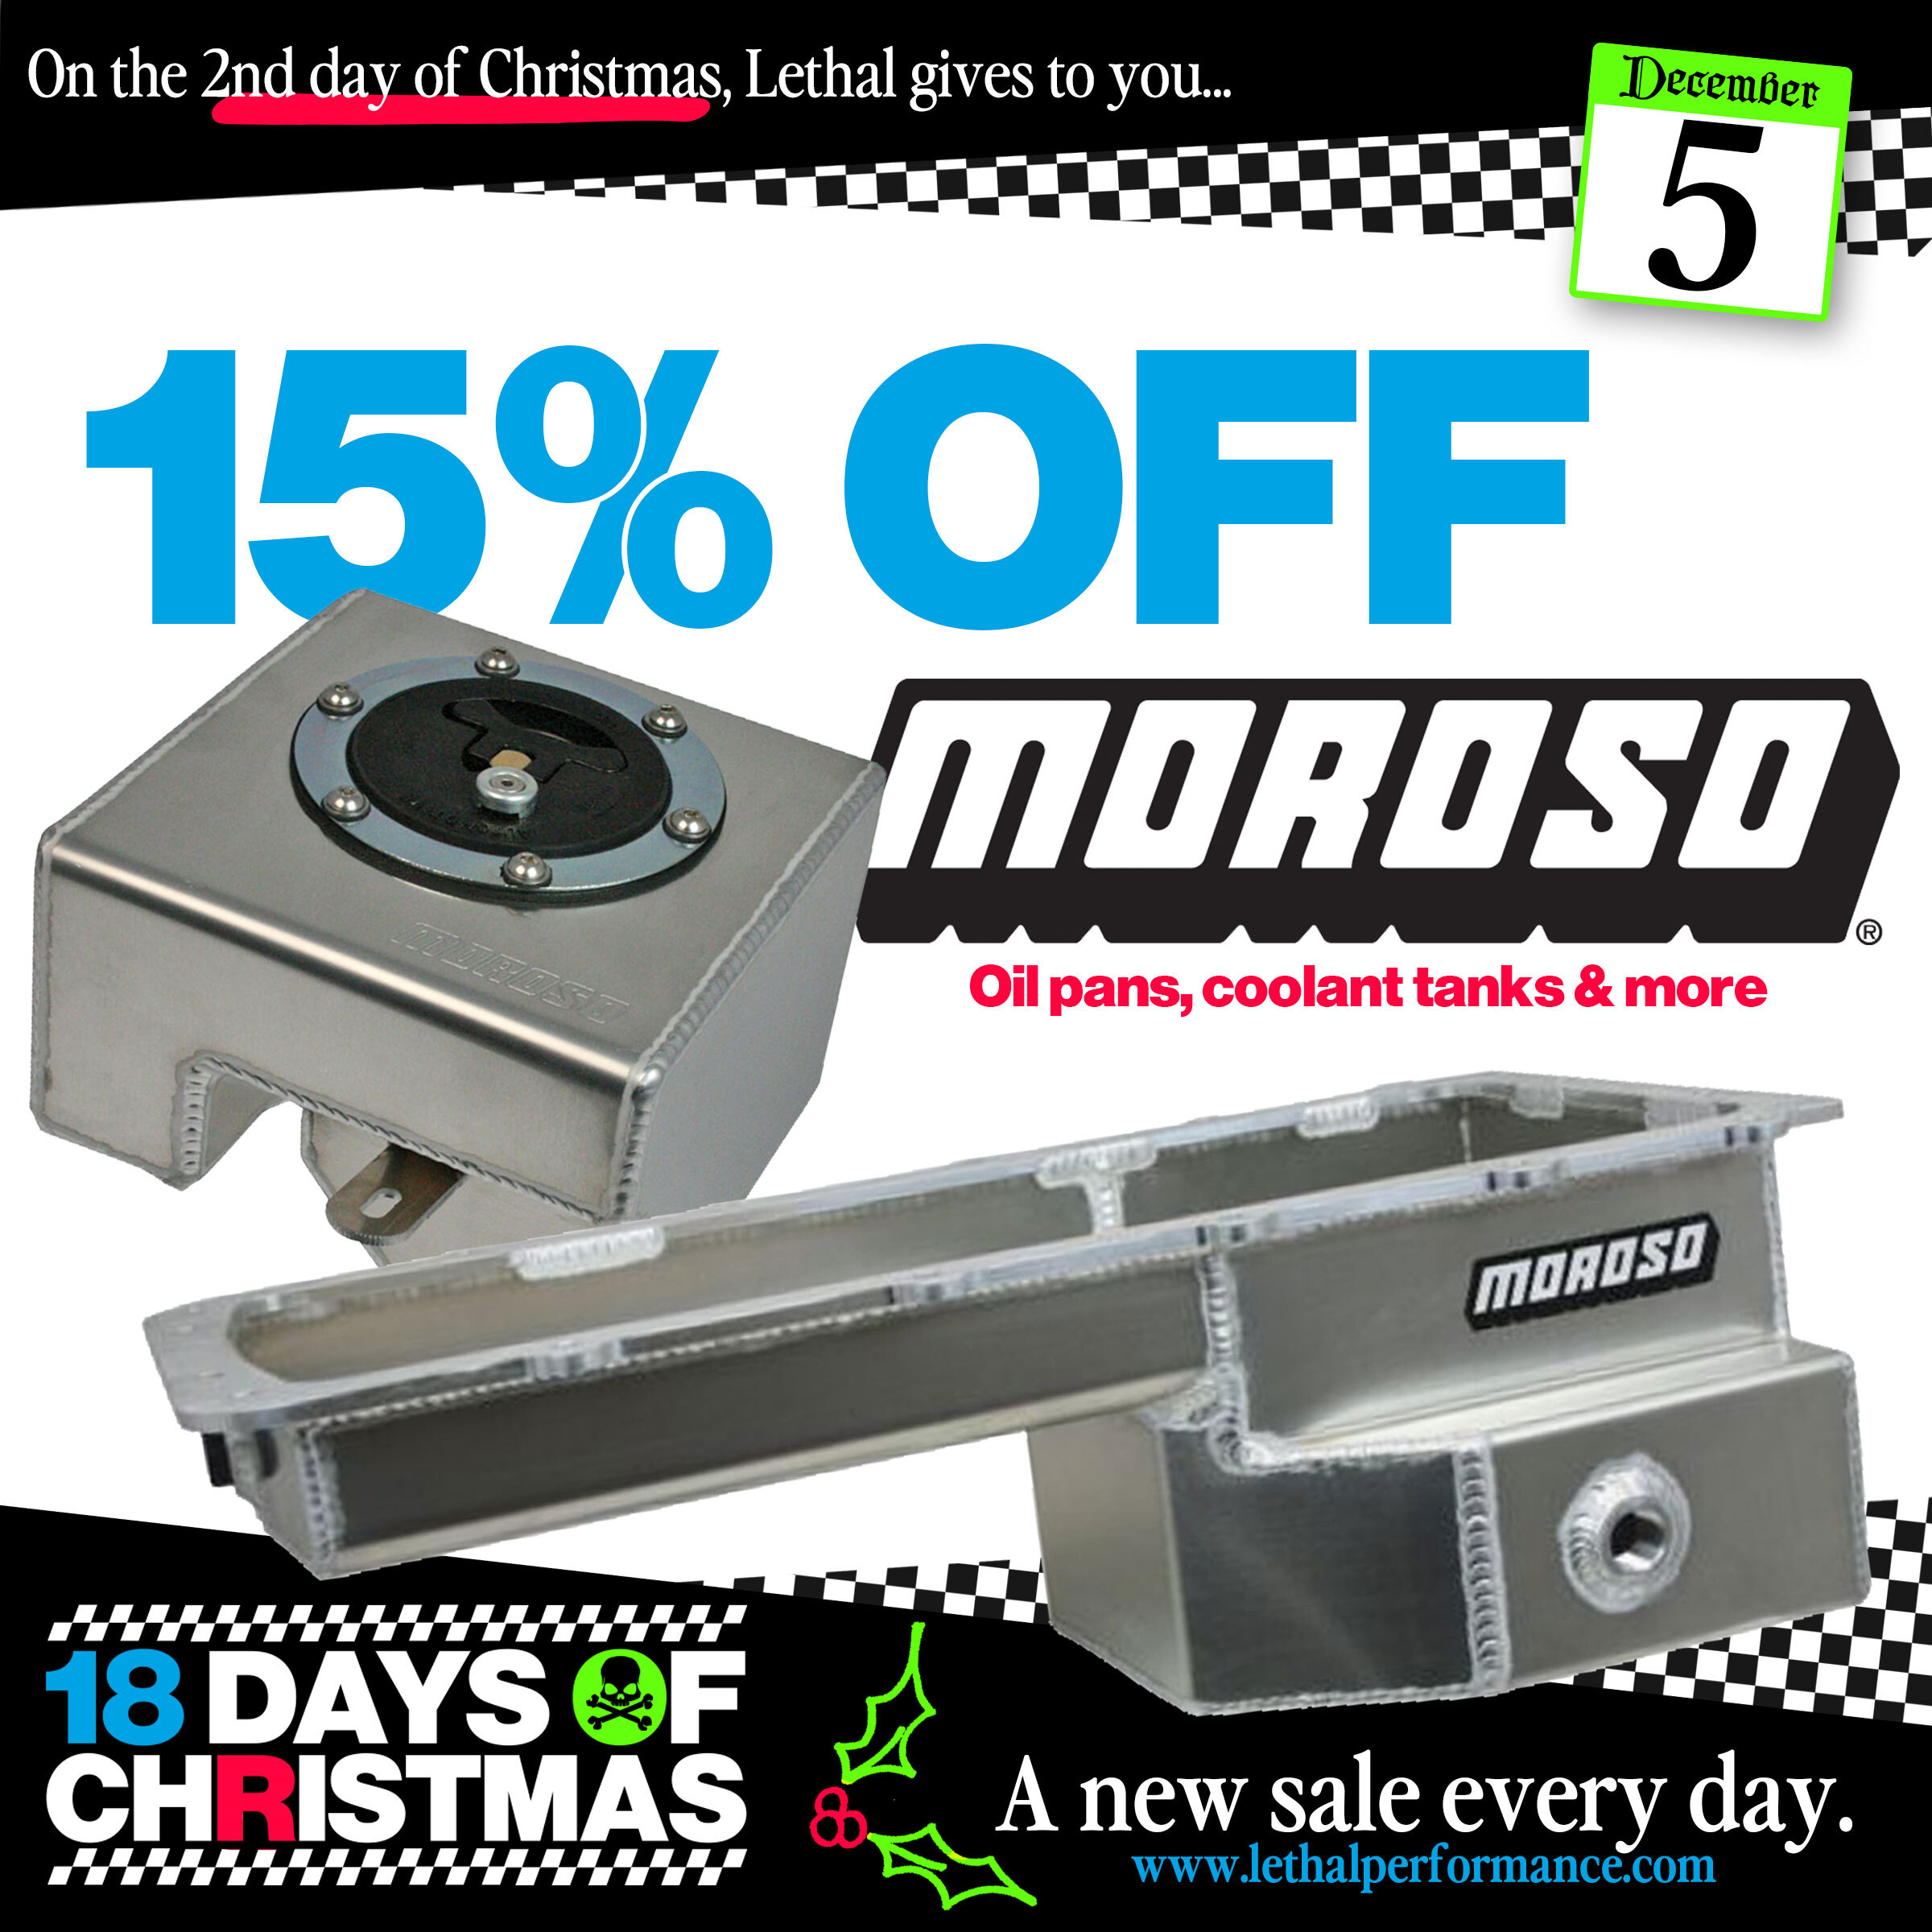 S650 Mustang Lethal Perfomance's 18 Days of Christmas SALES START NOW!! Moroso_Xmas